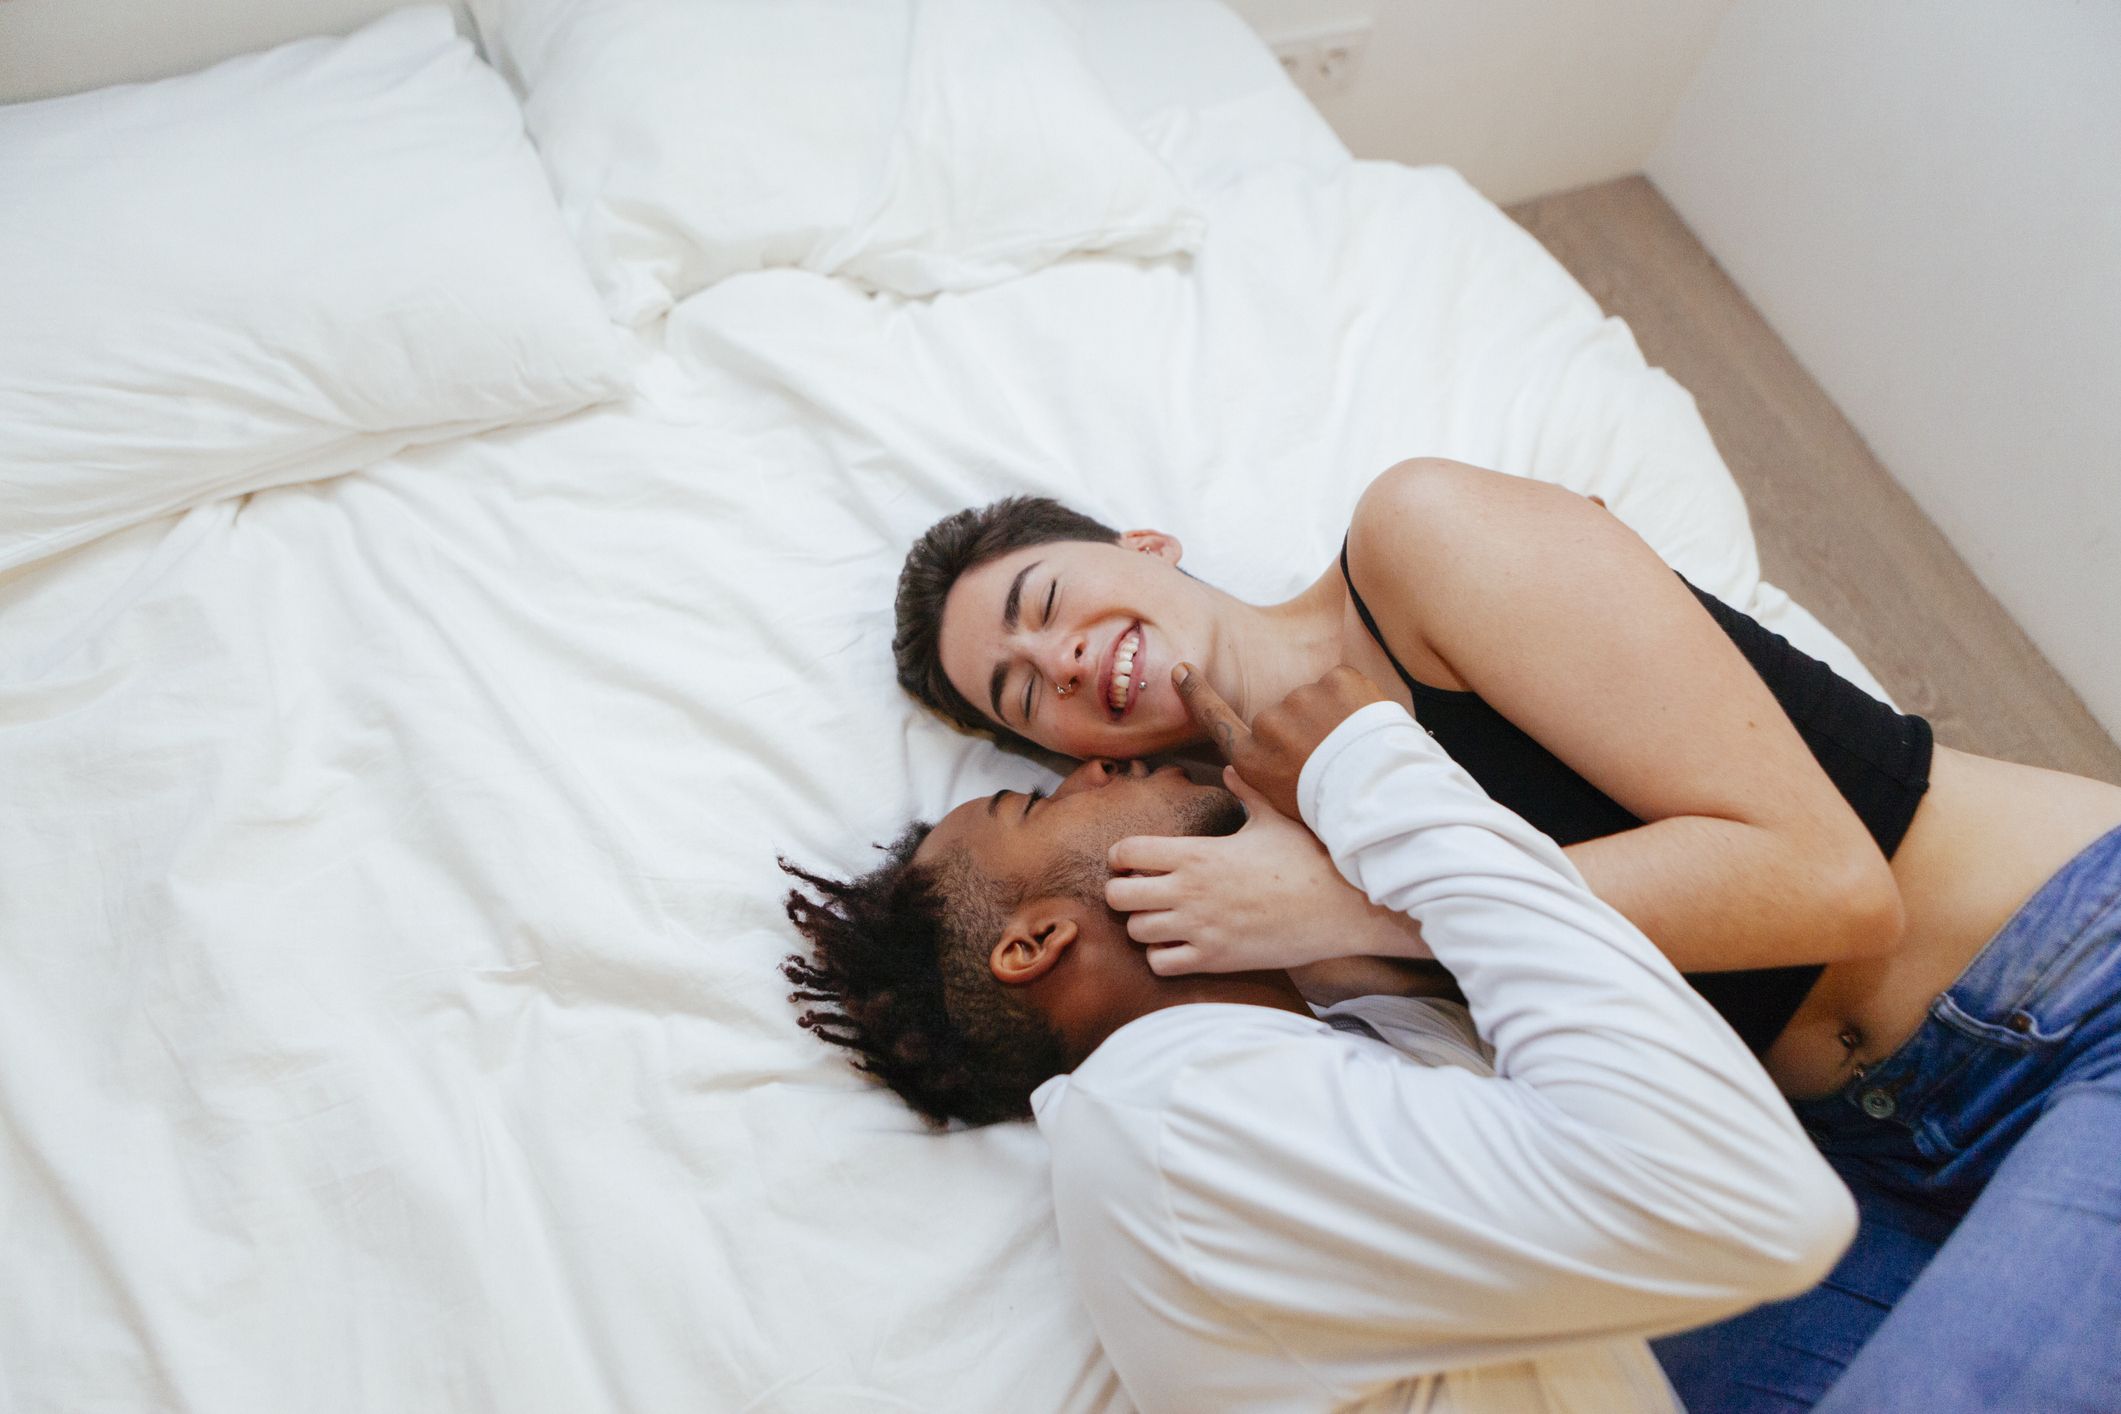 Sex Therapist Ian Kerner Answers 20 Sex and Romance Questions